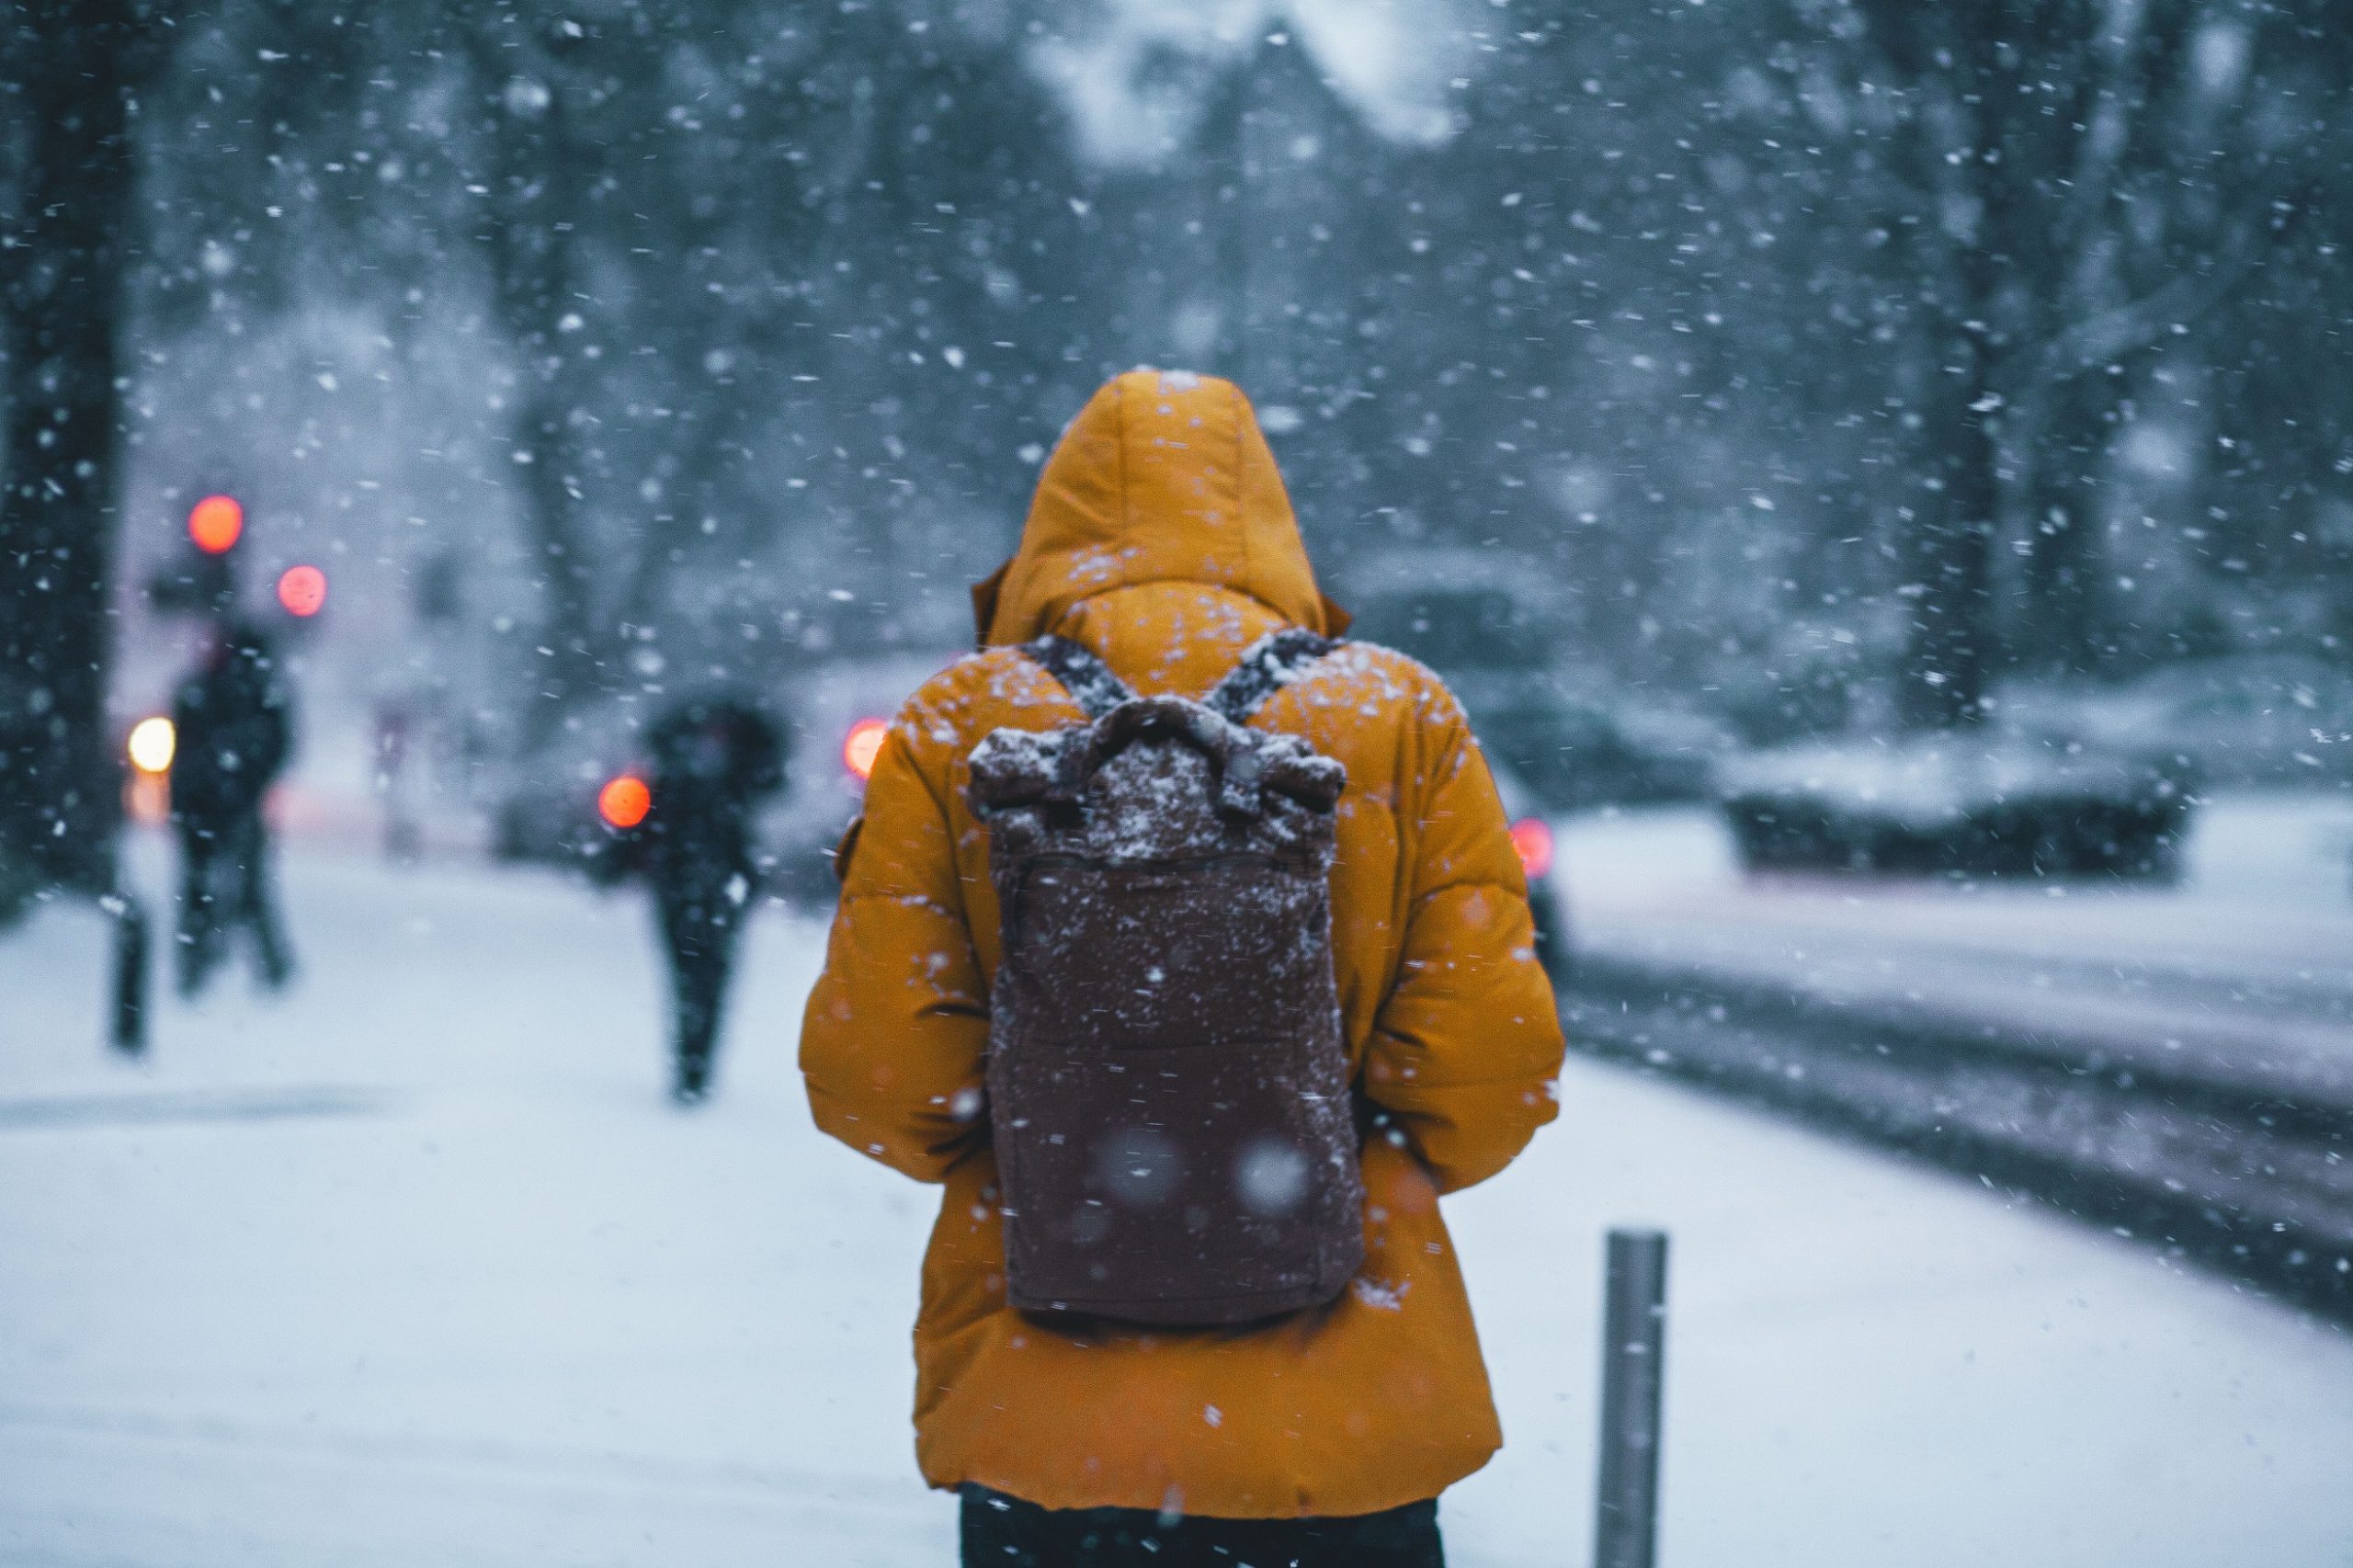 Person wearing a yellow parka and a backpack walks down a cold, snowy street.